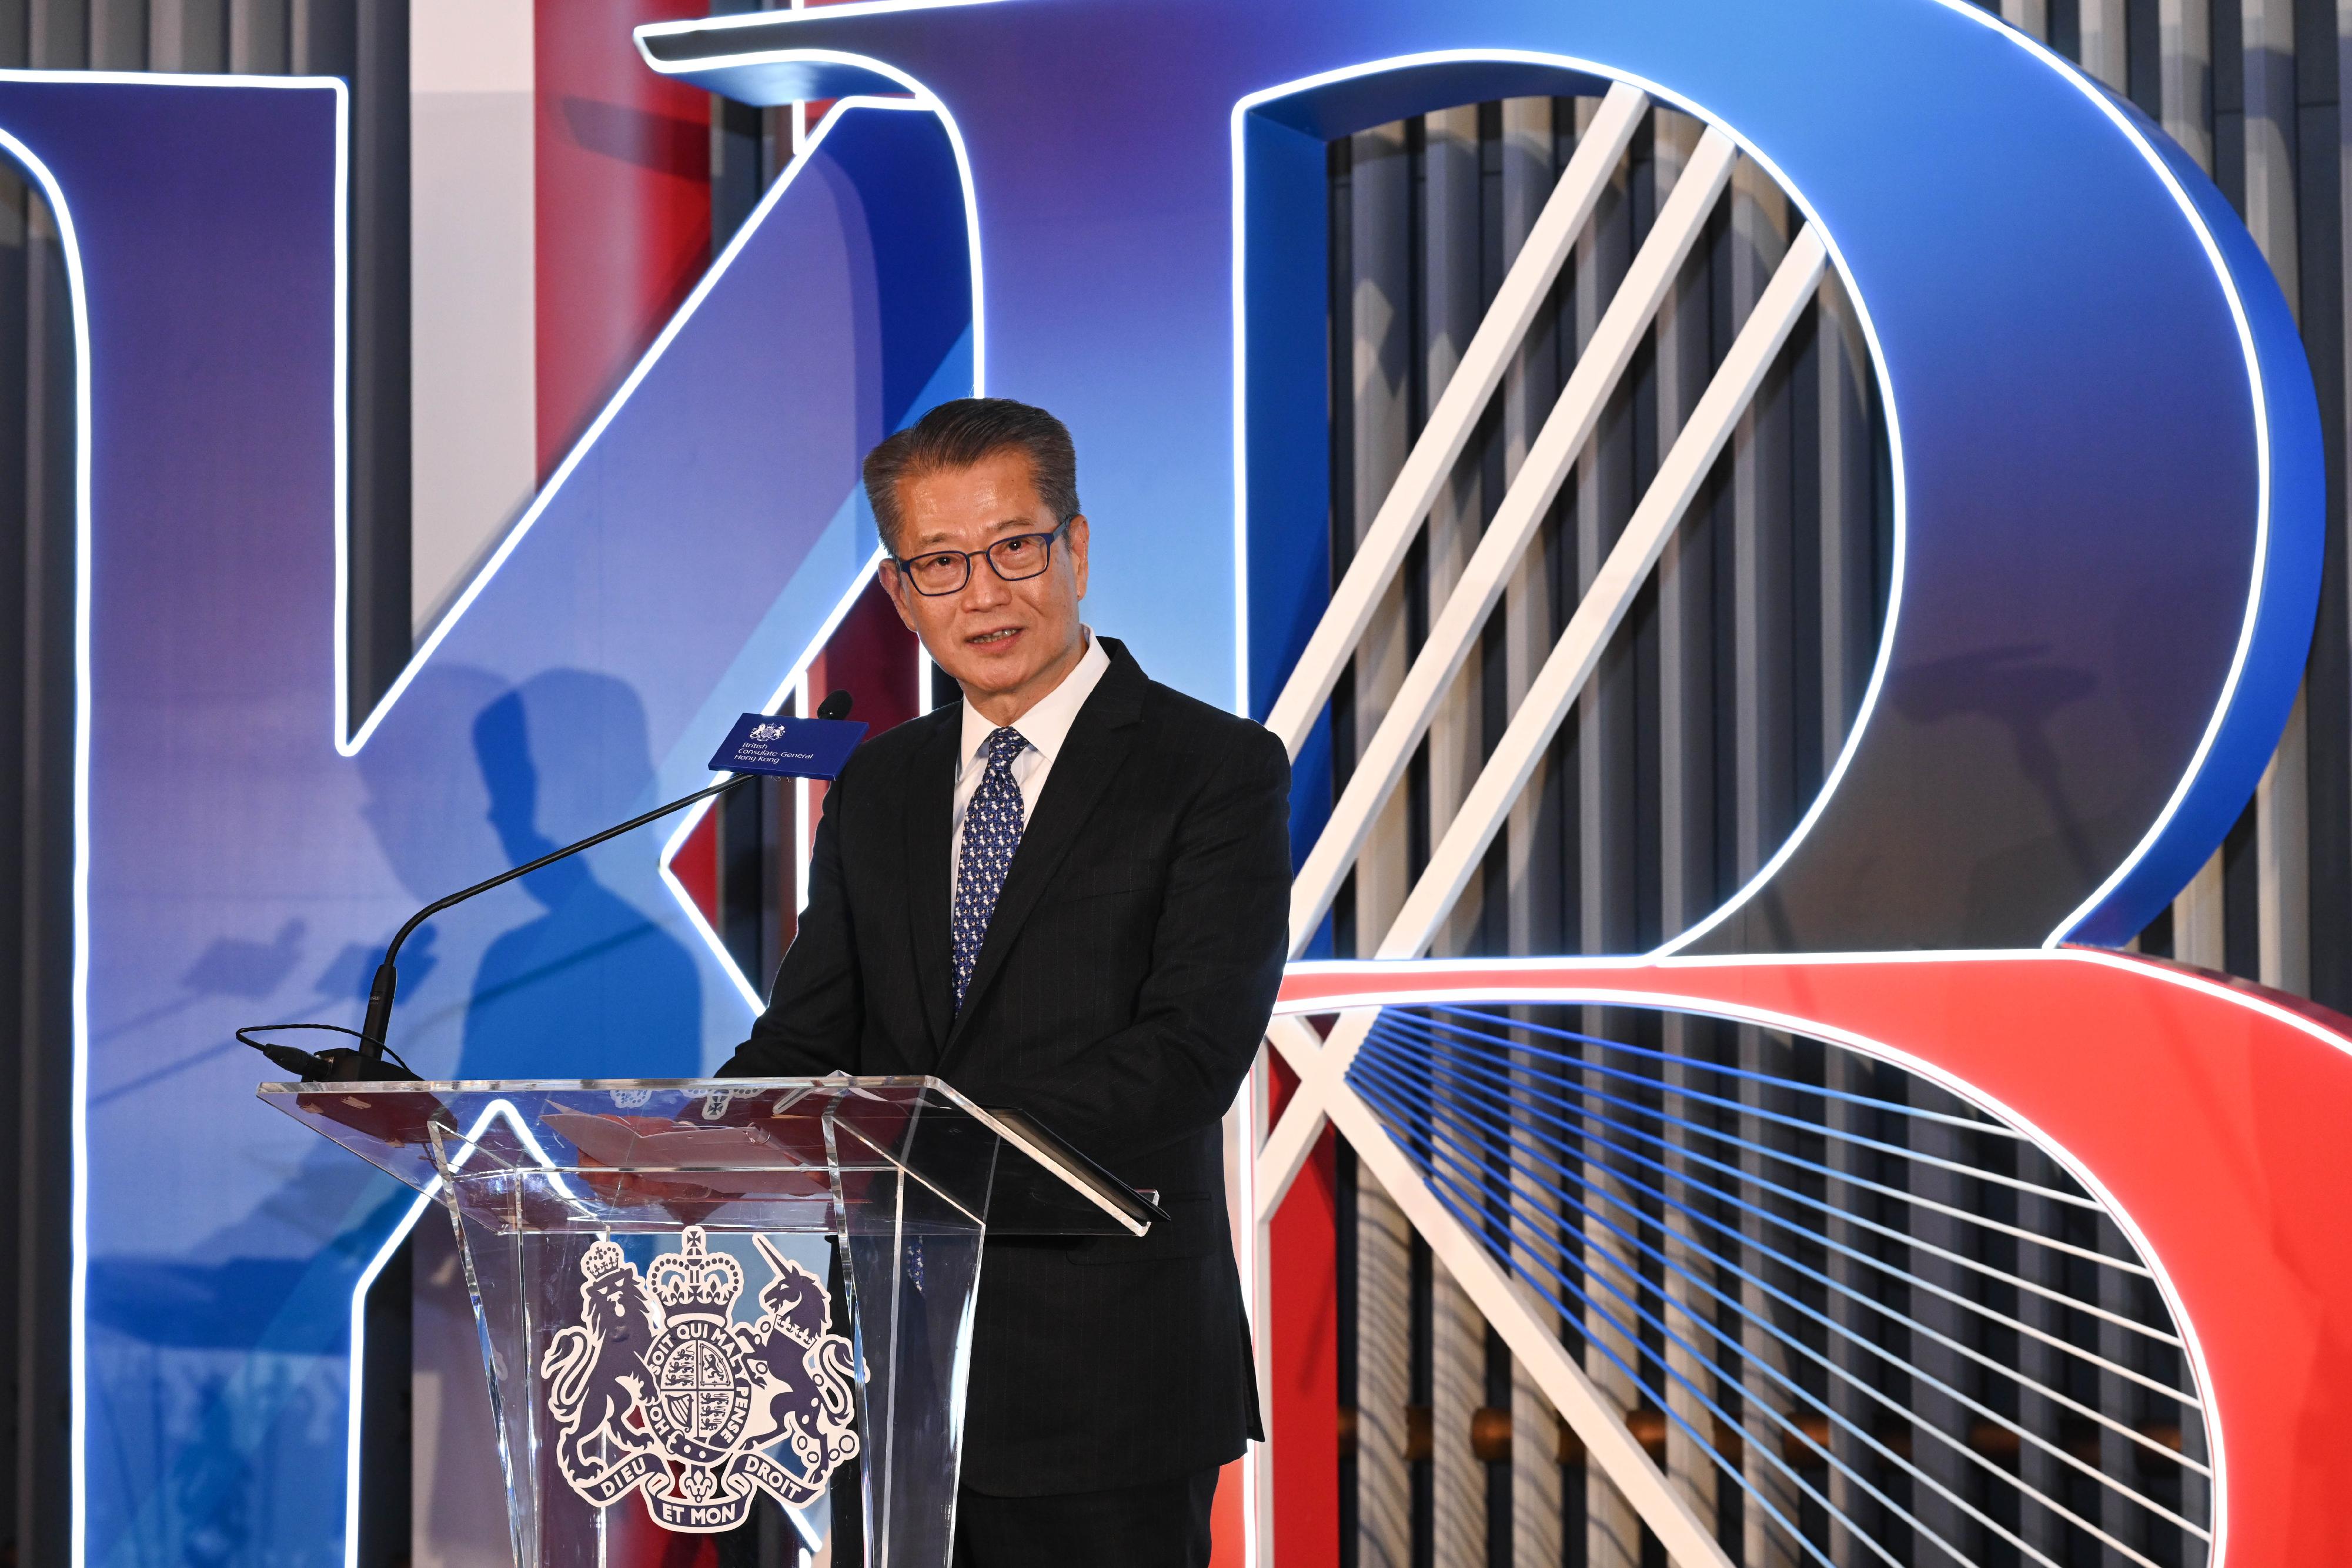 The Financial Secretary, Mr Paul Chan, speaks at the reception to celebrate the birthday of His Majesty King Charles III of the United Kingdom today (November 28).

